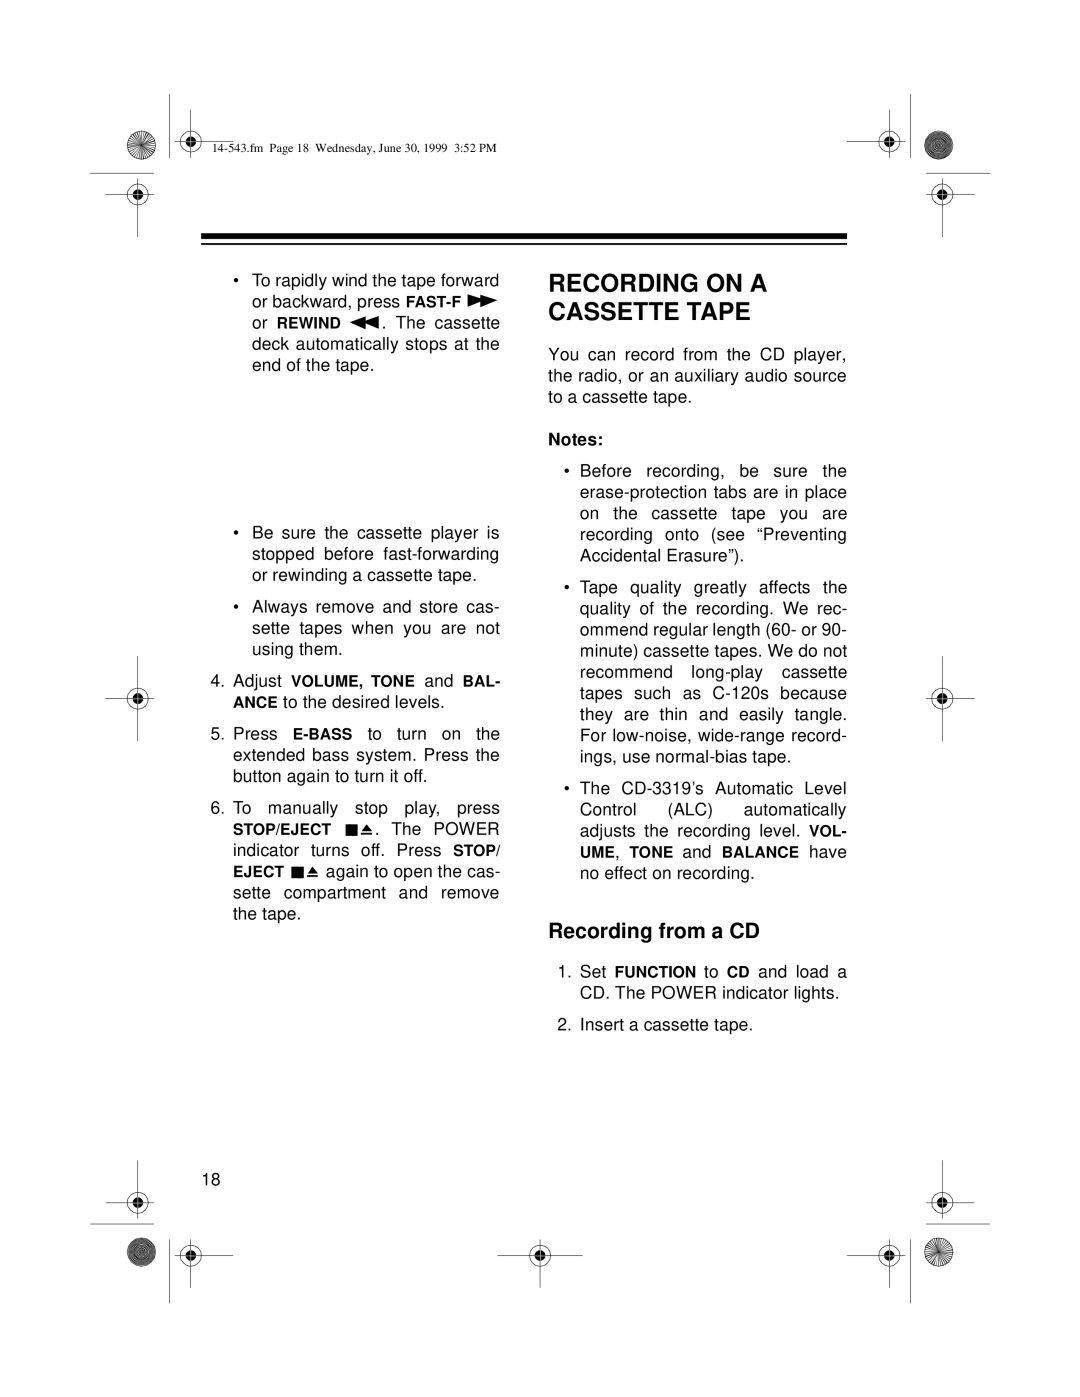 Radio Shack CD-3319 owner manual Recording On A Cassette Tape, Recording from a CD 